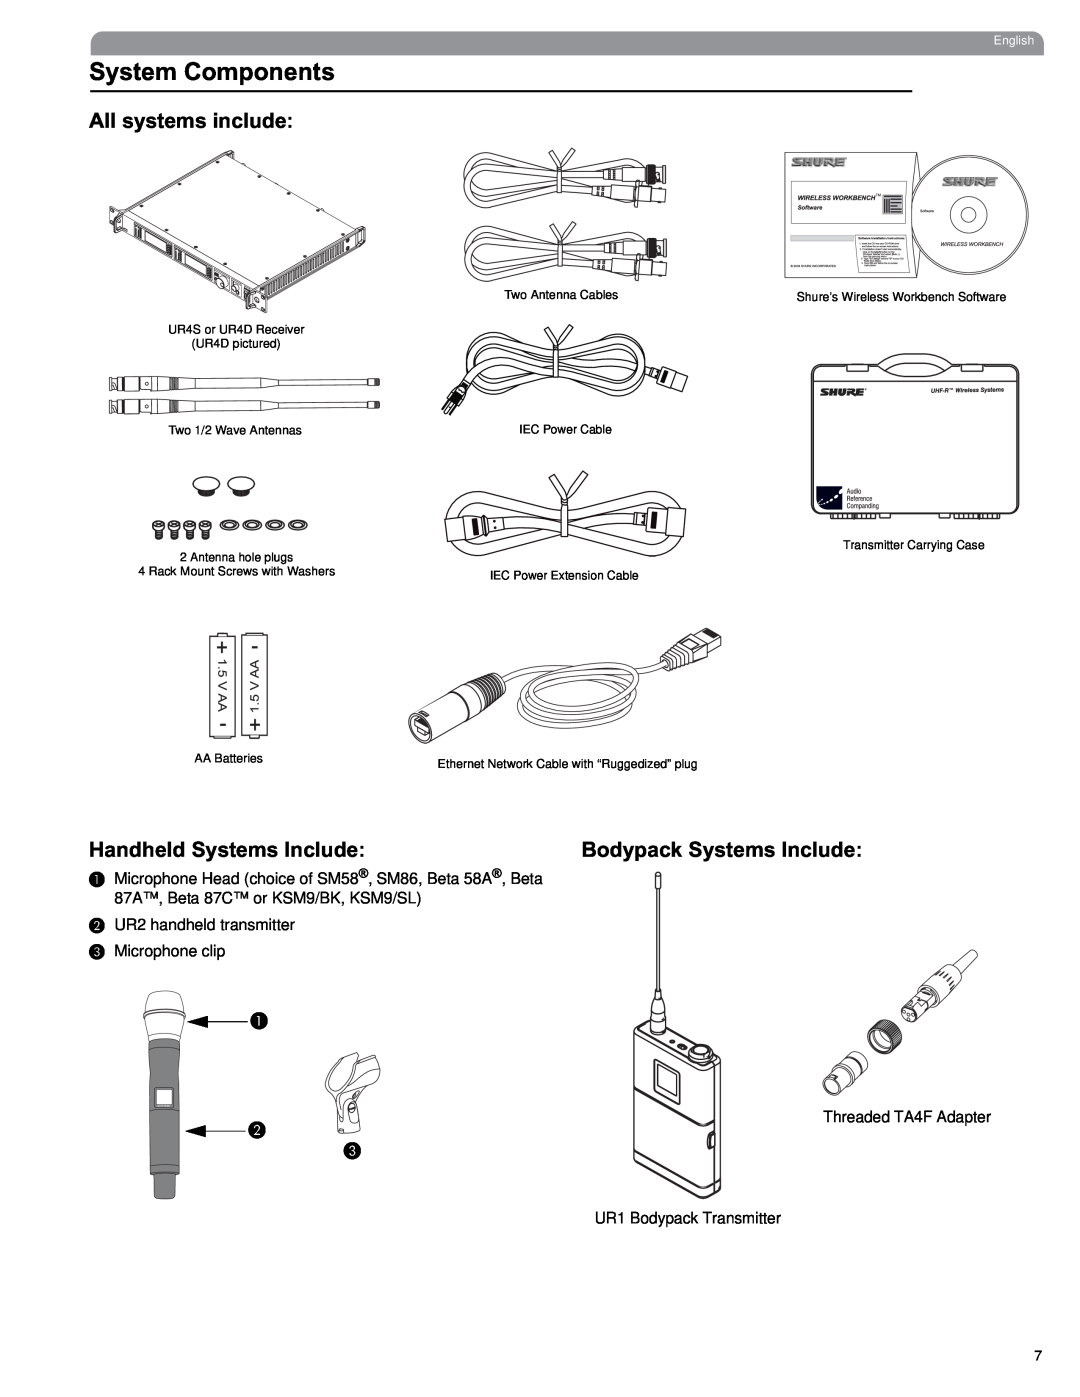 Shure UHF manual System Components, All systems include, Handheld Systems Include, Bodypack Systems Include, English 